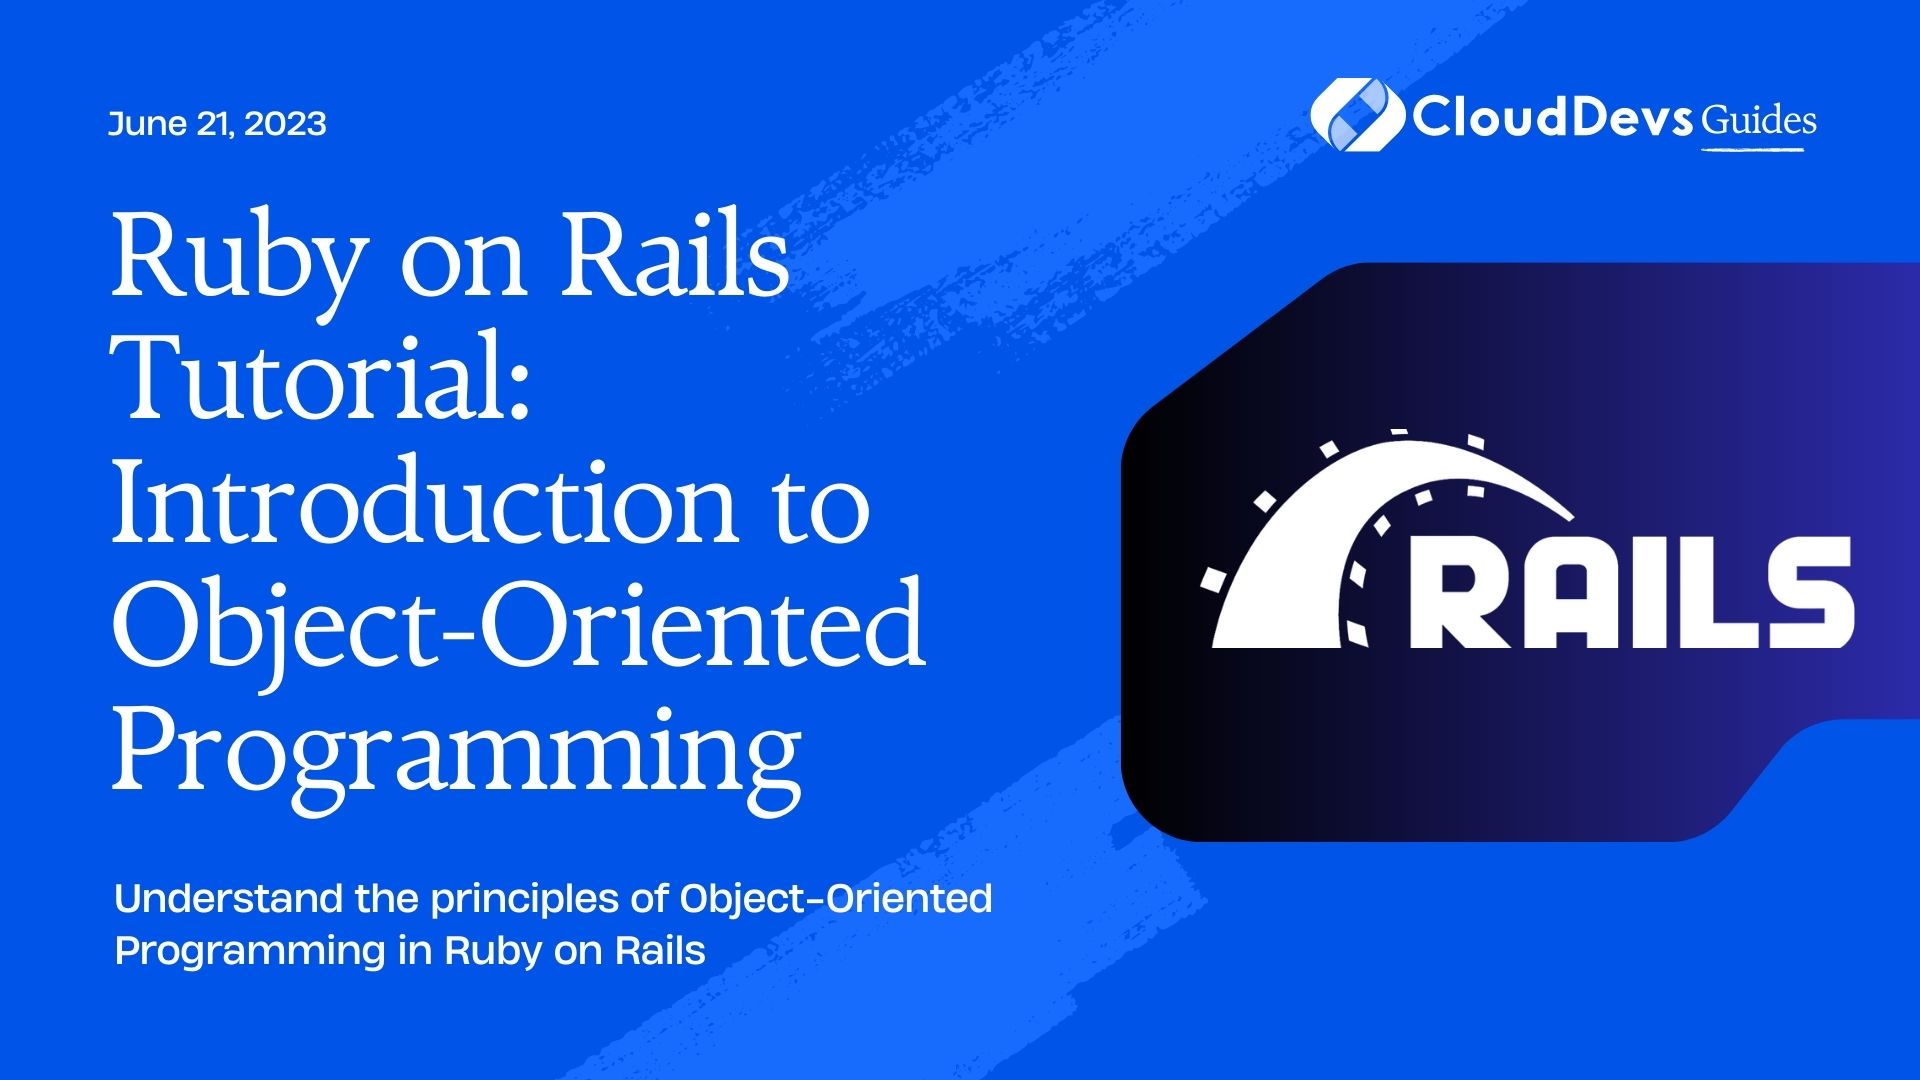 Introduction to Object-Oriented Programming with Ruby on Rails